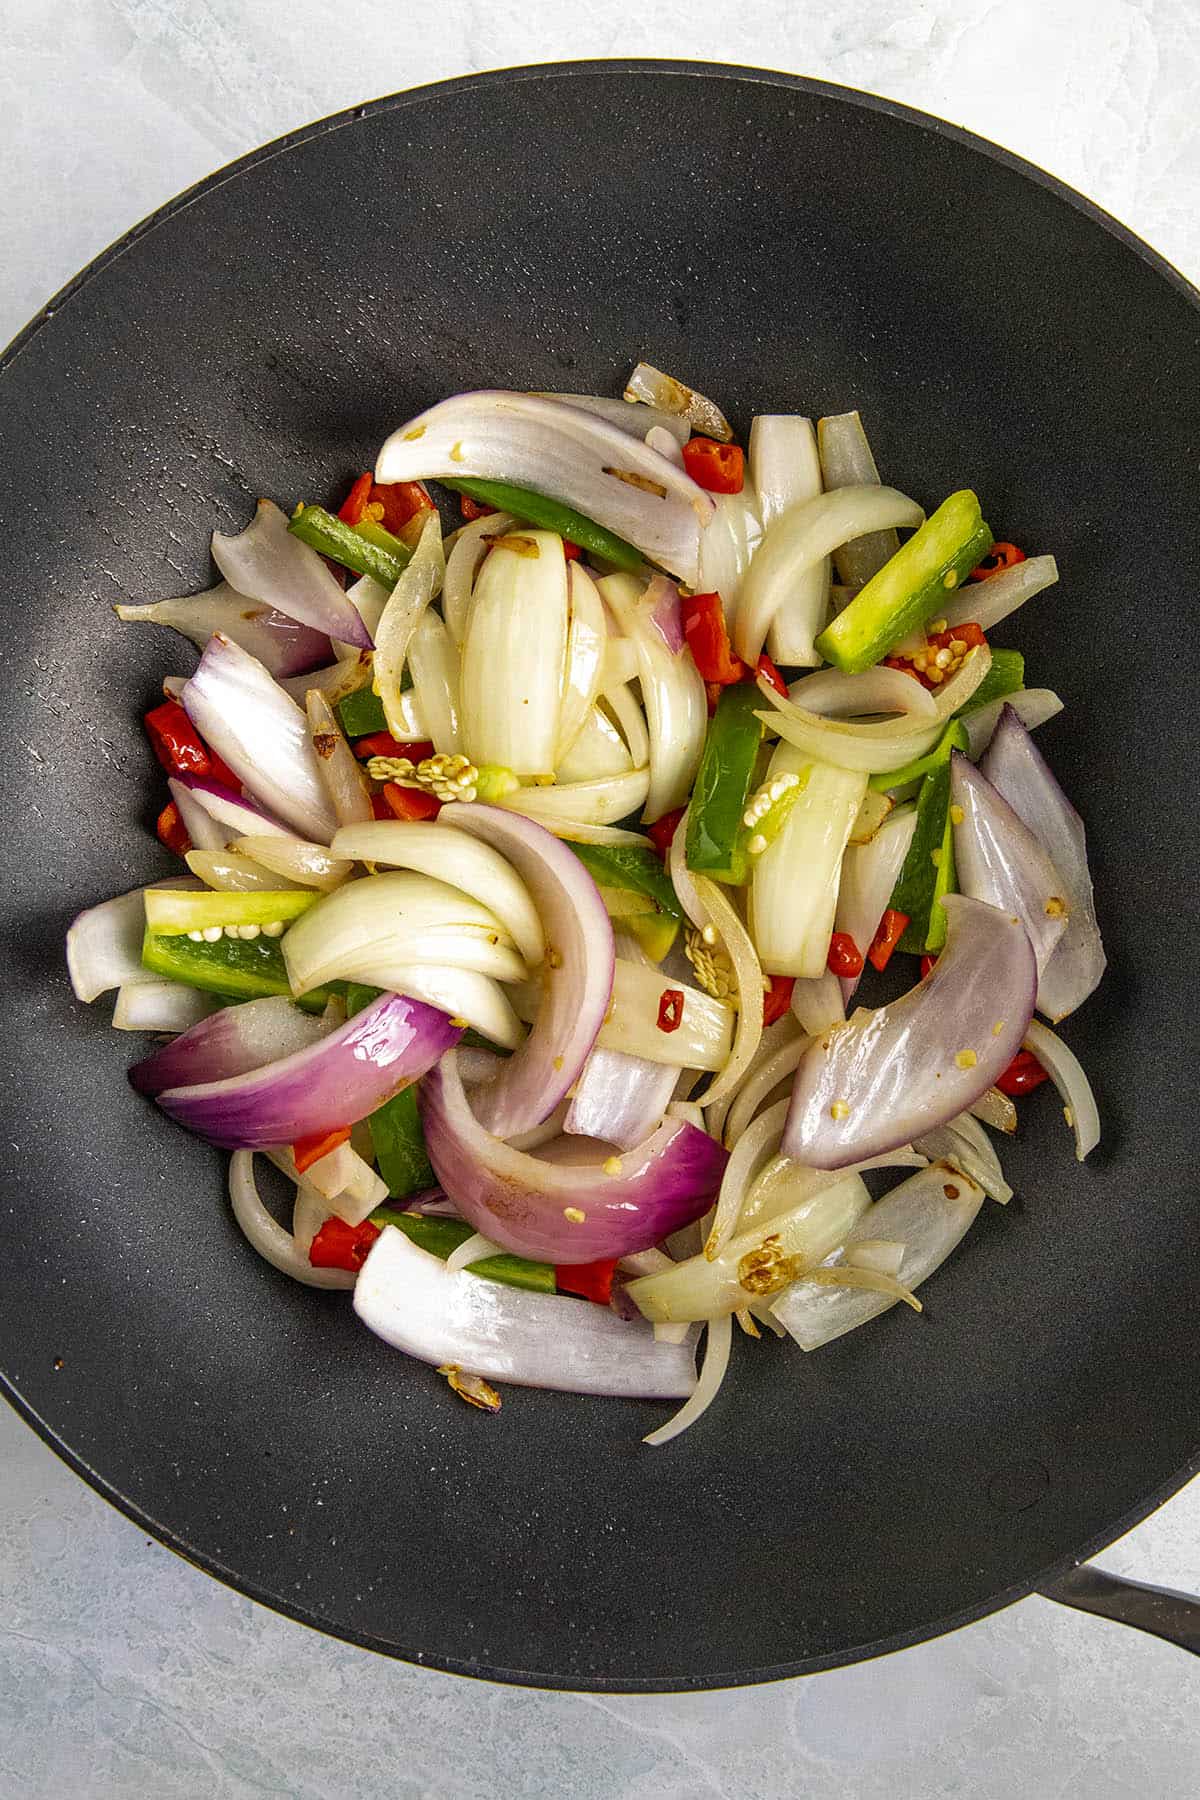 Stir frying the vegetables in a hot pan